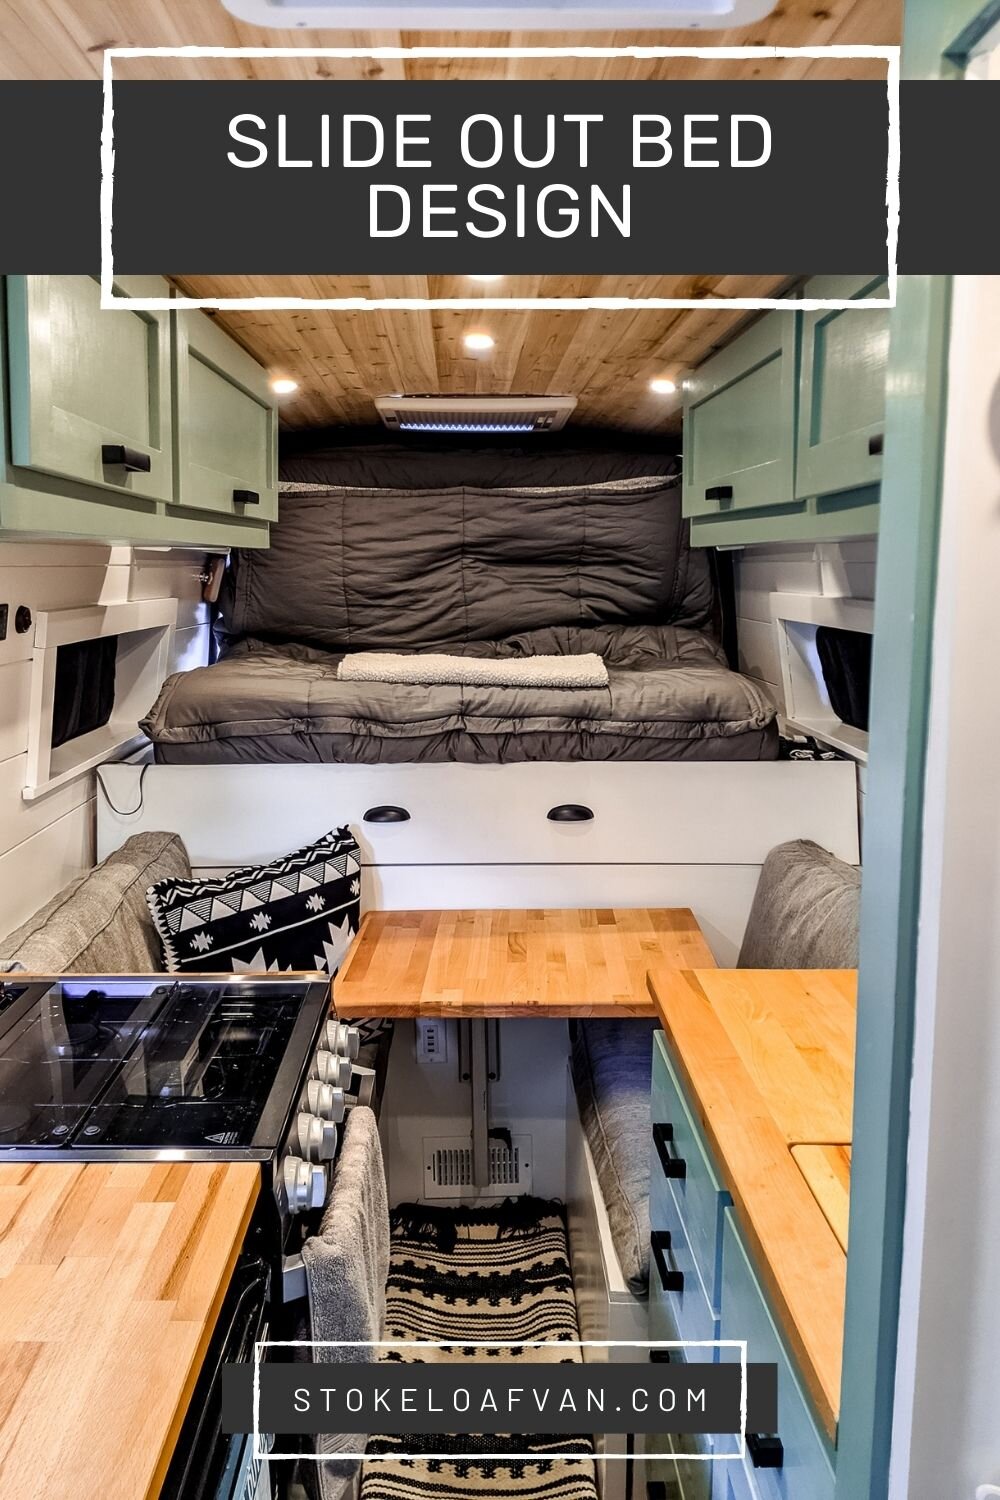 I love the under and over the bed storage! I would make the layout for the  rest of the van more open floor plan